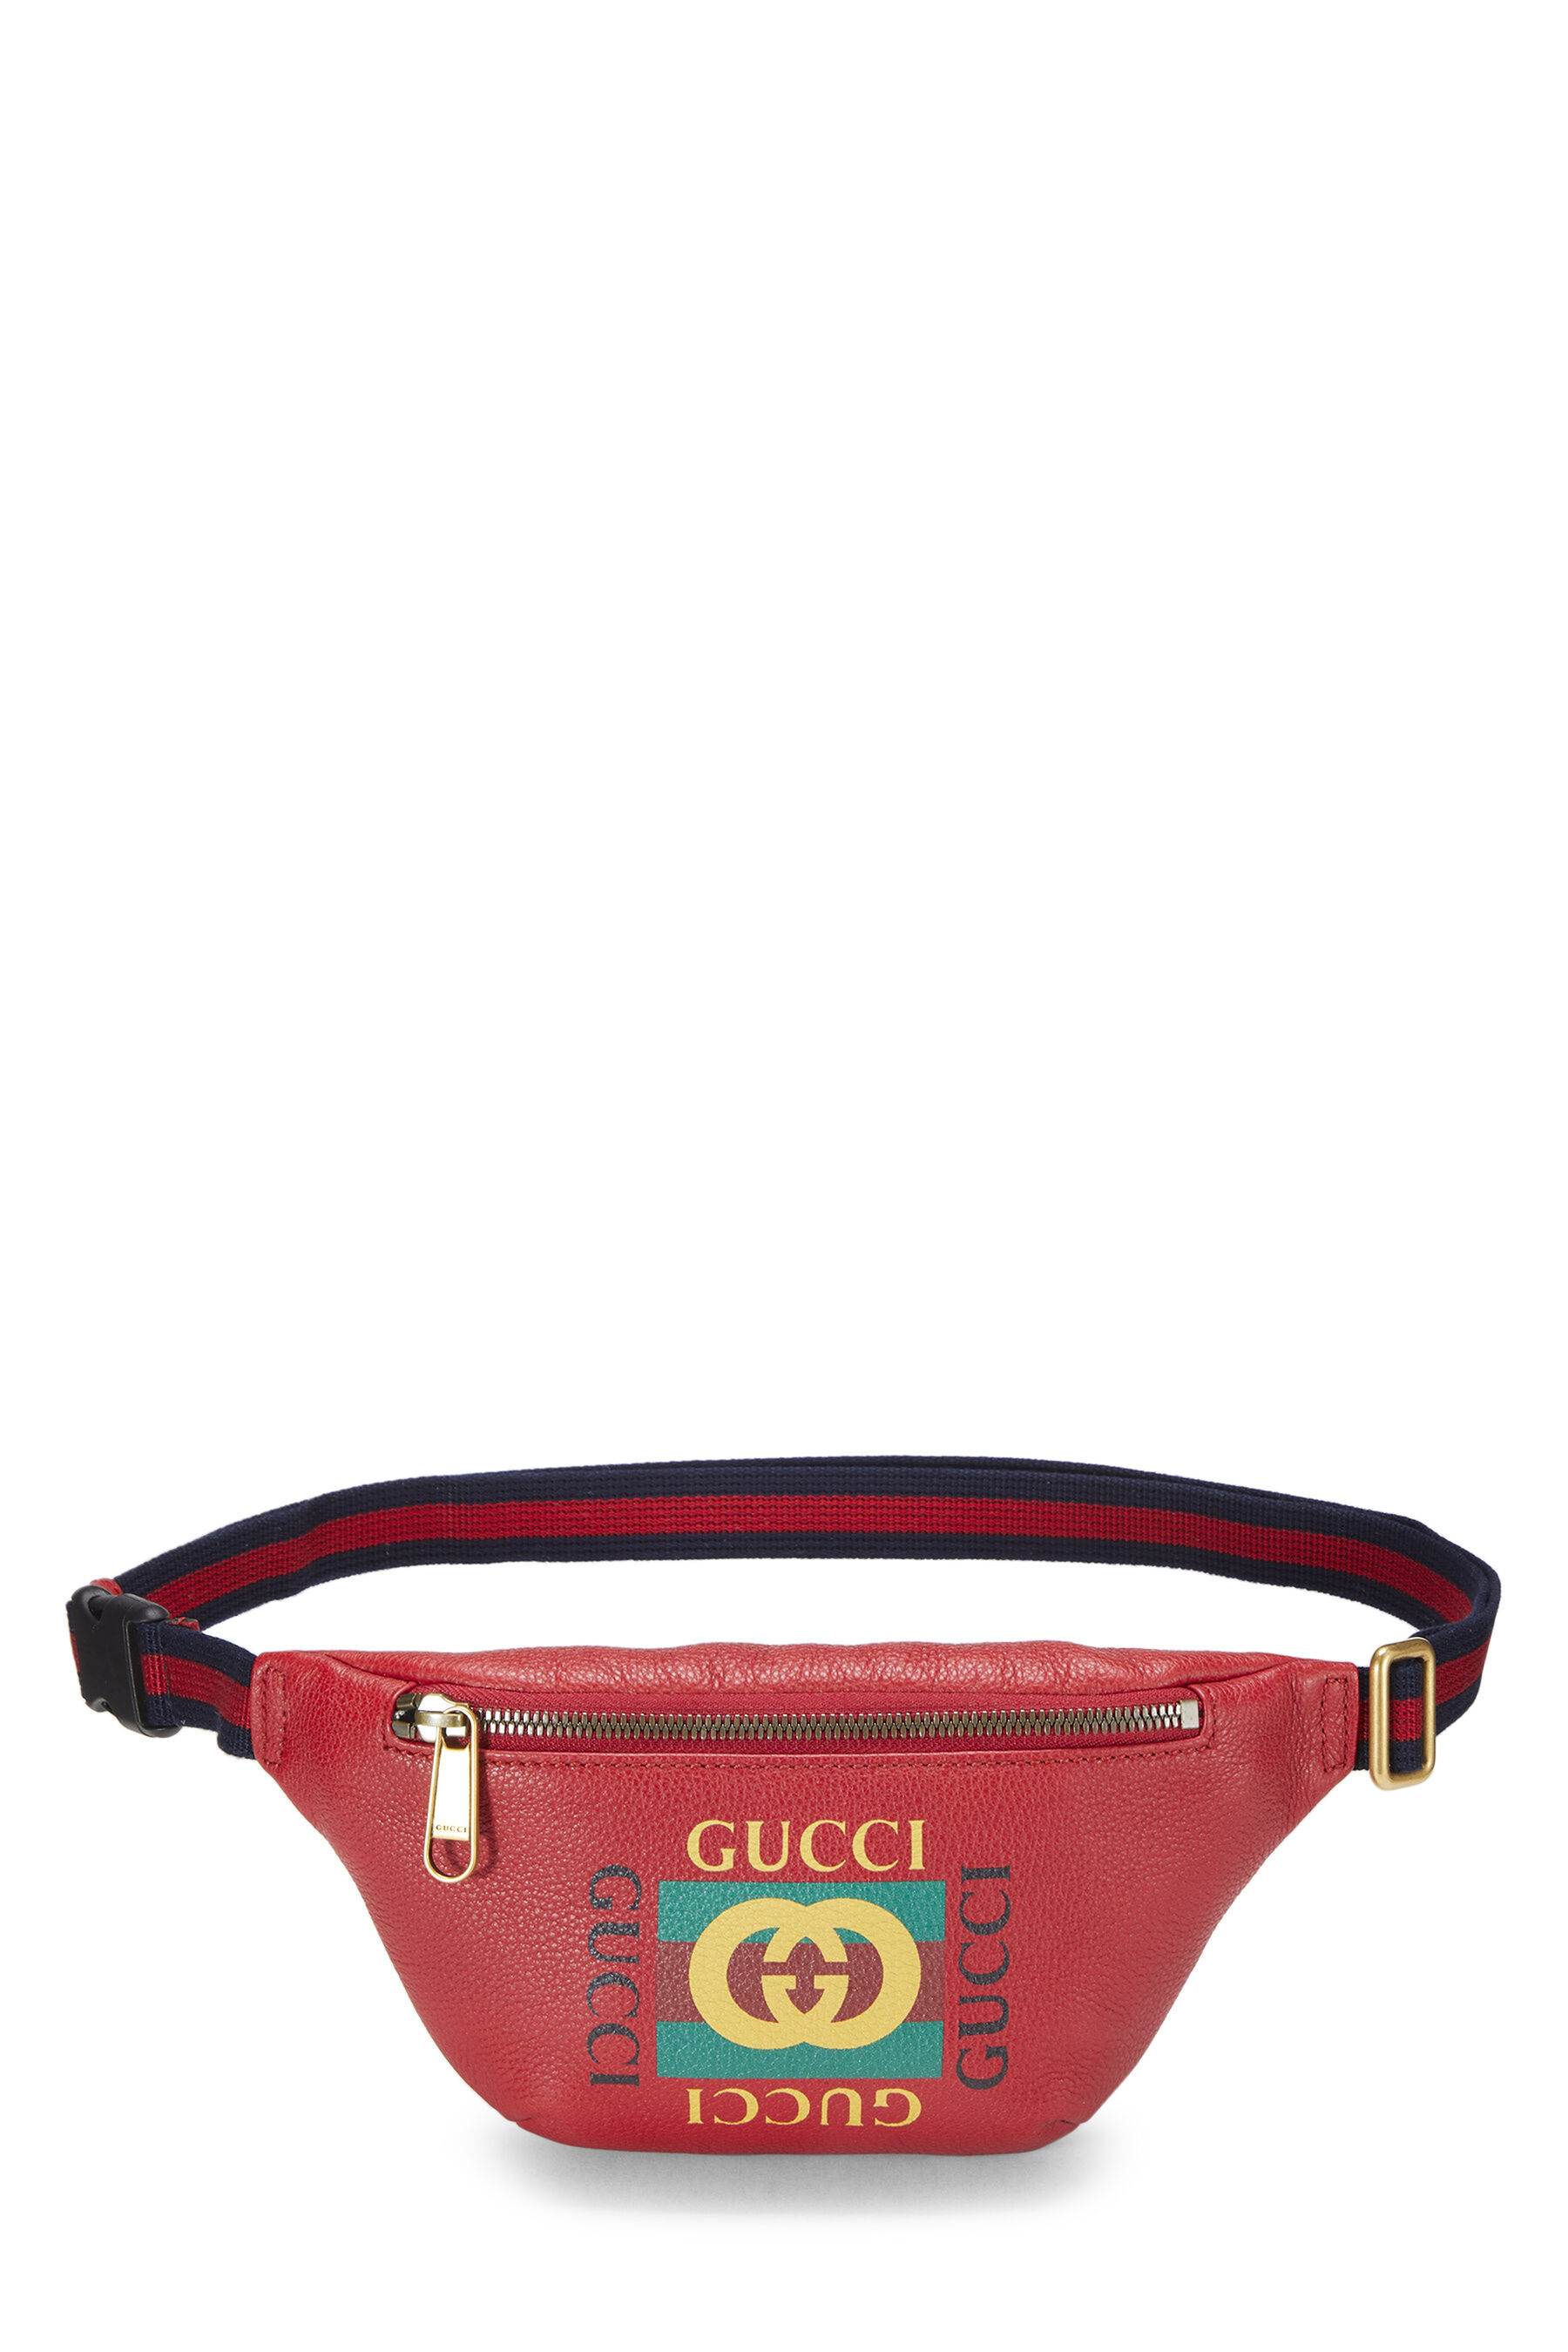 Gucci | Bags | Trend Alert Gucci Gg Marmont Small Red Matelass Shoulder Bag  | Poshmark